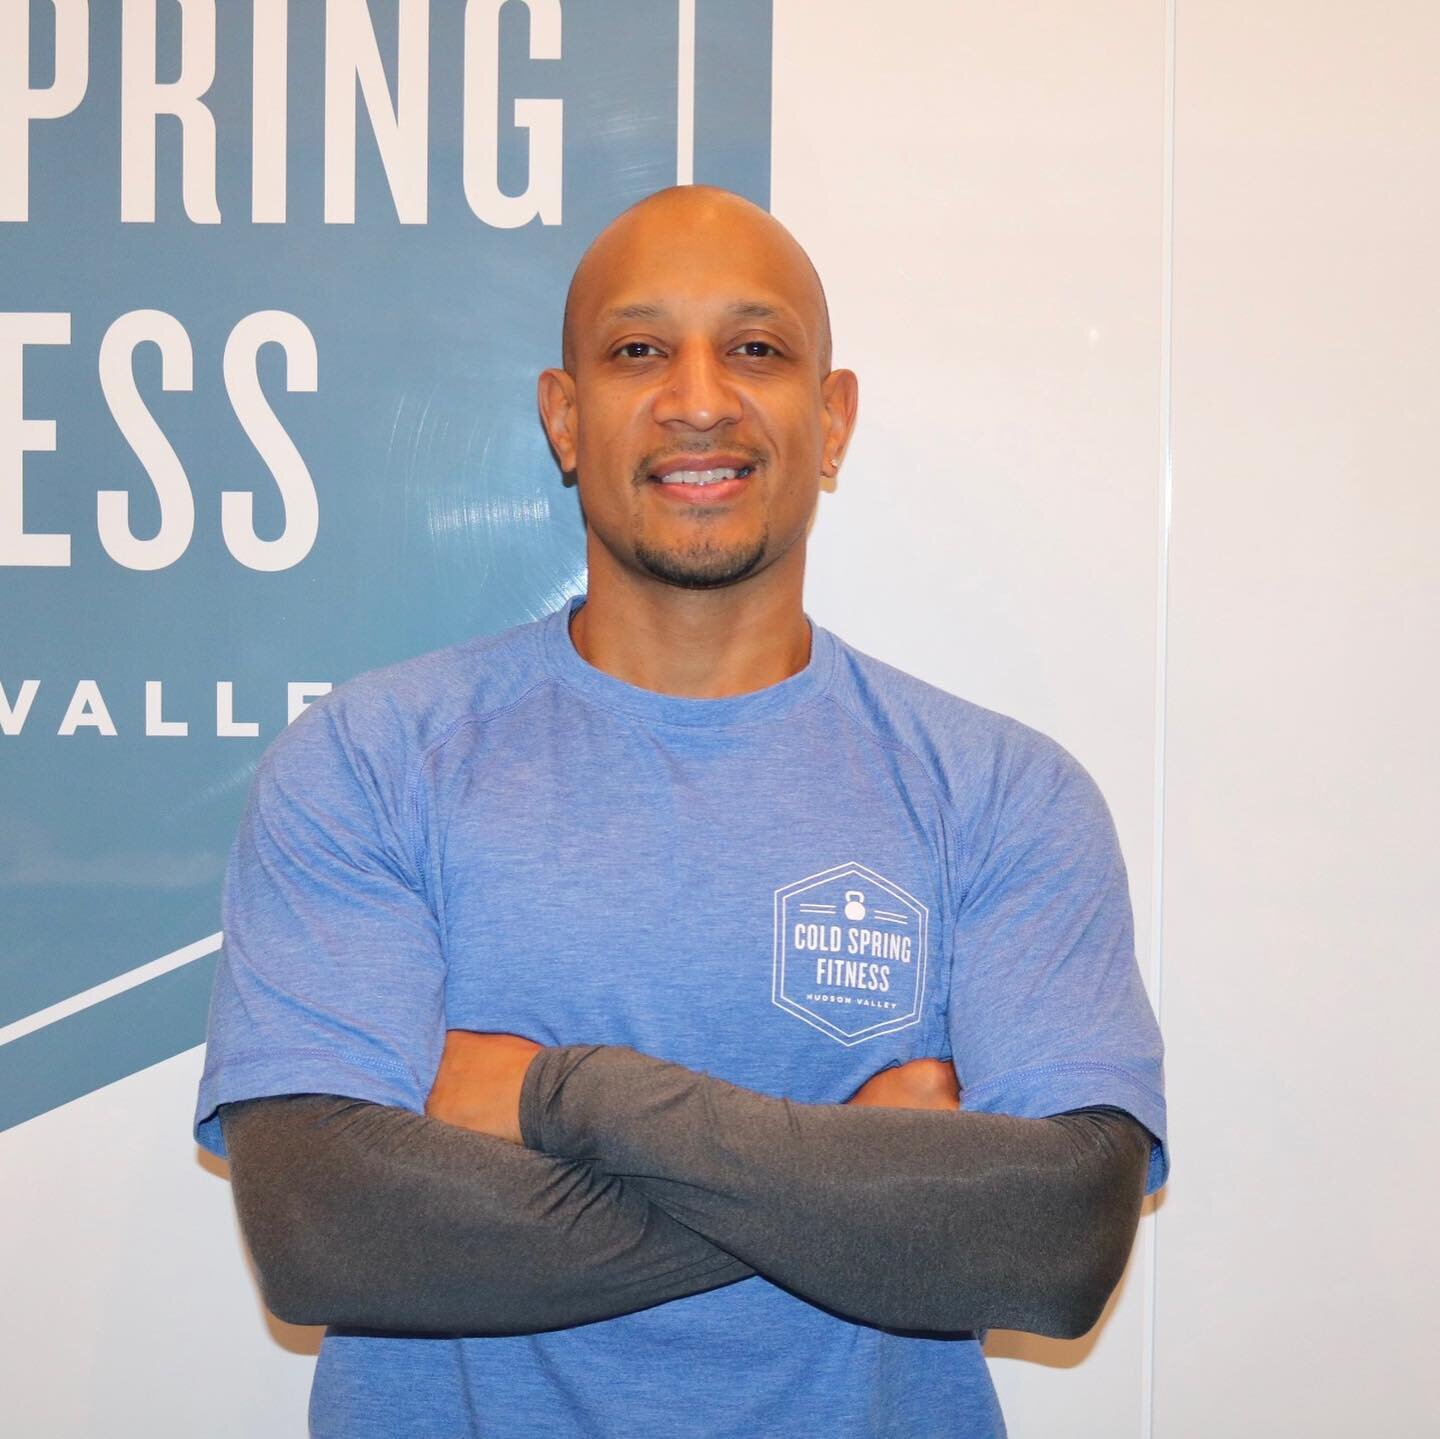 Monday Motivation
A quote that Norvil lives by:

&ldquo;Believe in yourself. Trust the process. And no matter what, don&rsquo;t ever give up!&rdquo;

#personaltrainer #fitness #coldspringny #hudsonvalley #mondaymotivation